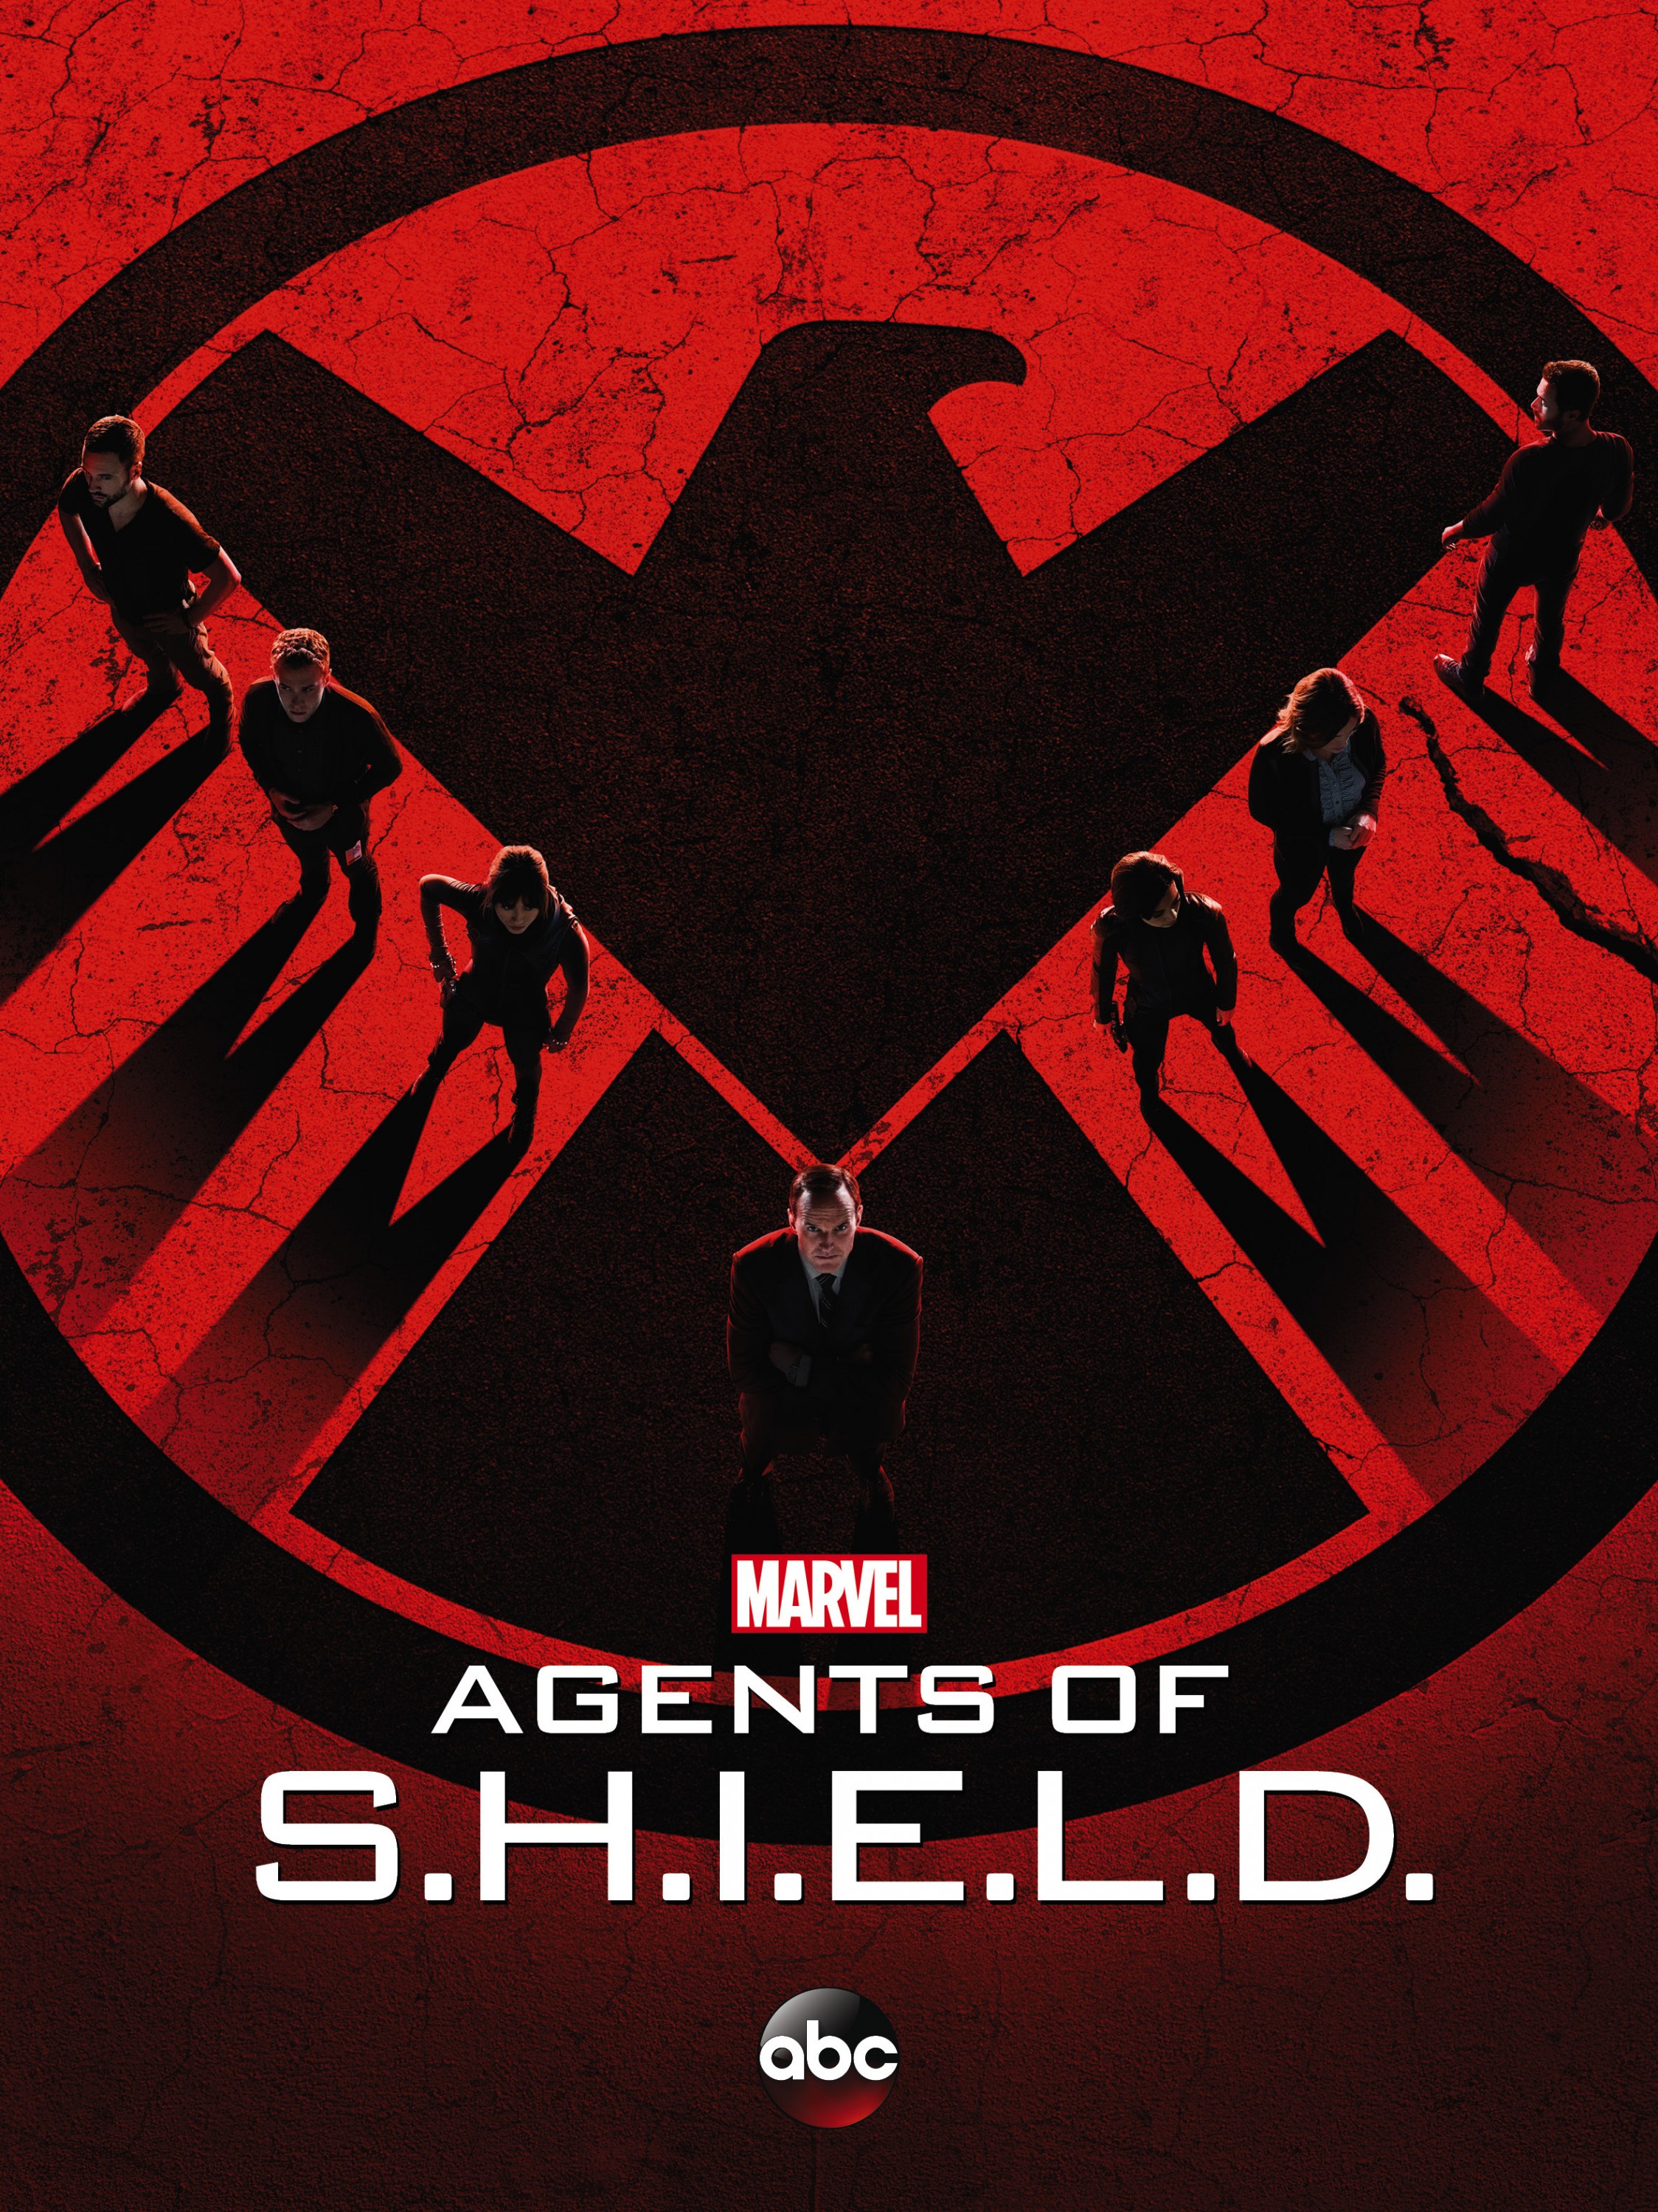 File Name 963571 963571 Agents Of Shield Wallpapers